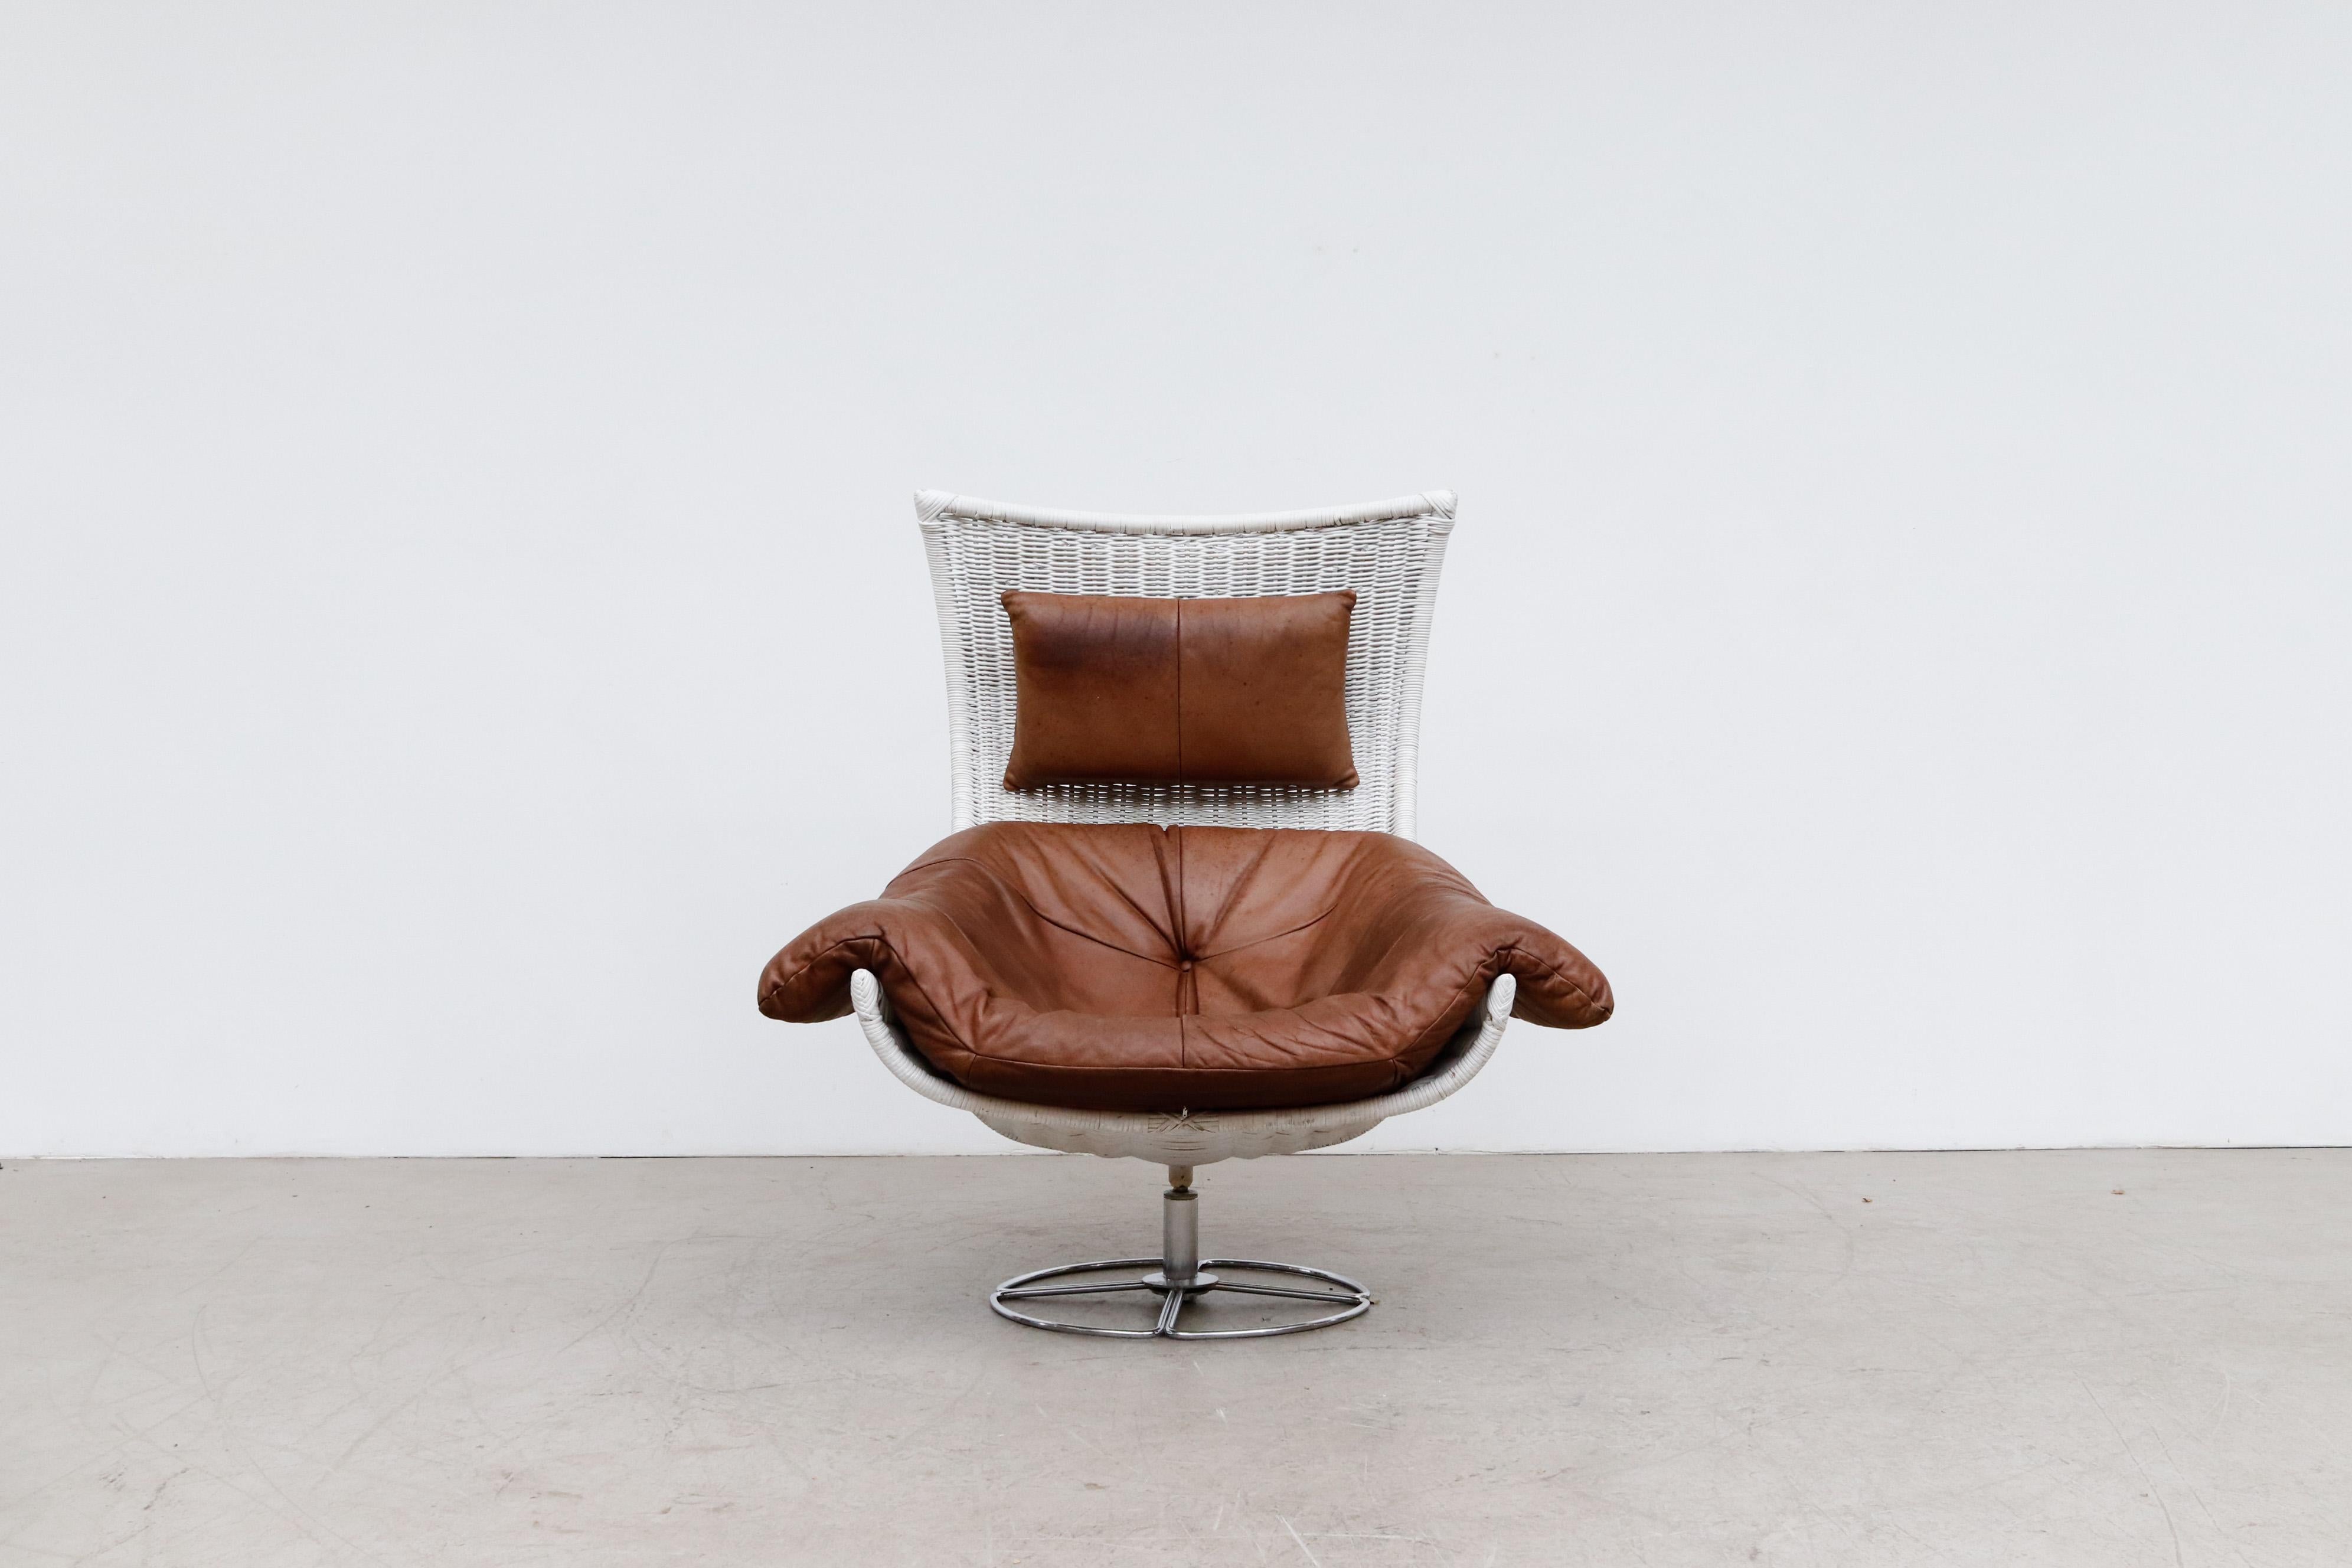 Gerard van den Berg designed, Mid-Century swivel lounge chair for highly acclaimed Dutch furniture manufacturer Montis. Van den Berg stands as one of Holland's most innovative and prolific designer whose work is equally committed to comfort and